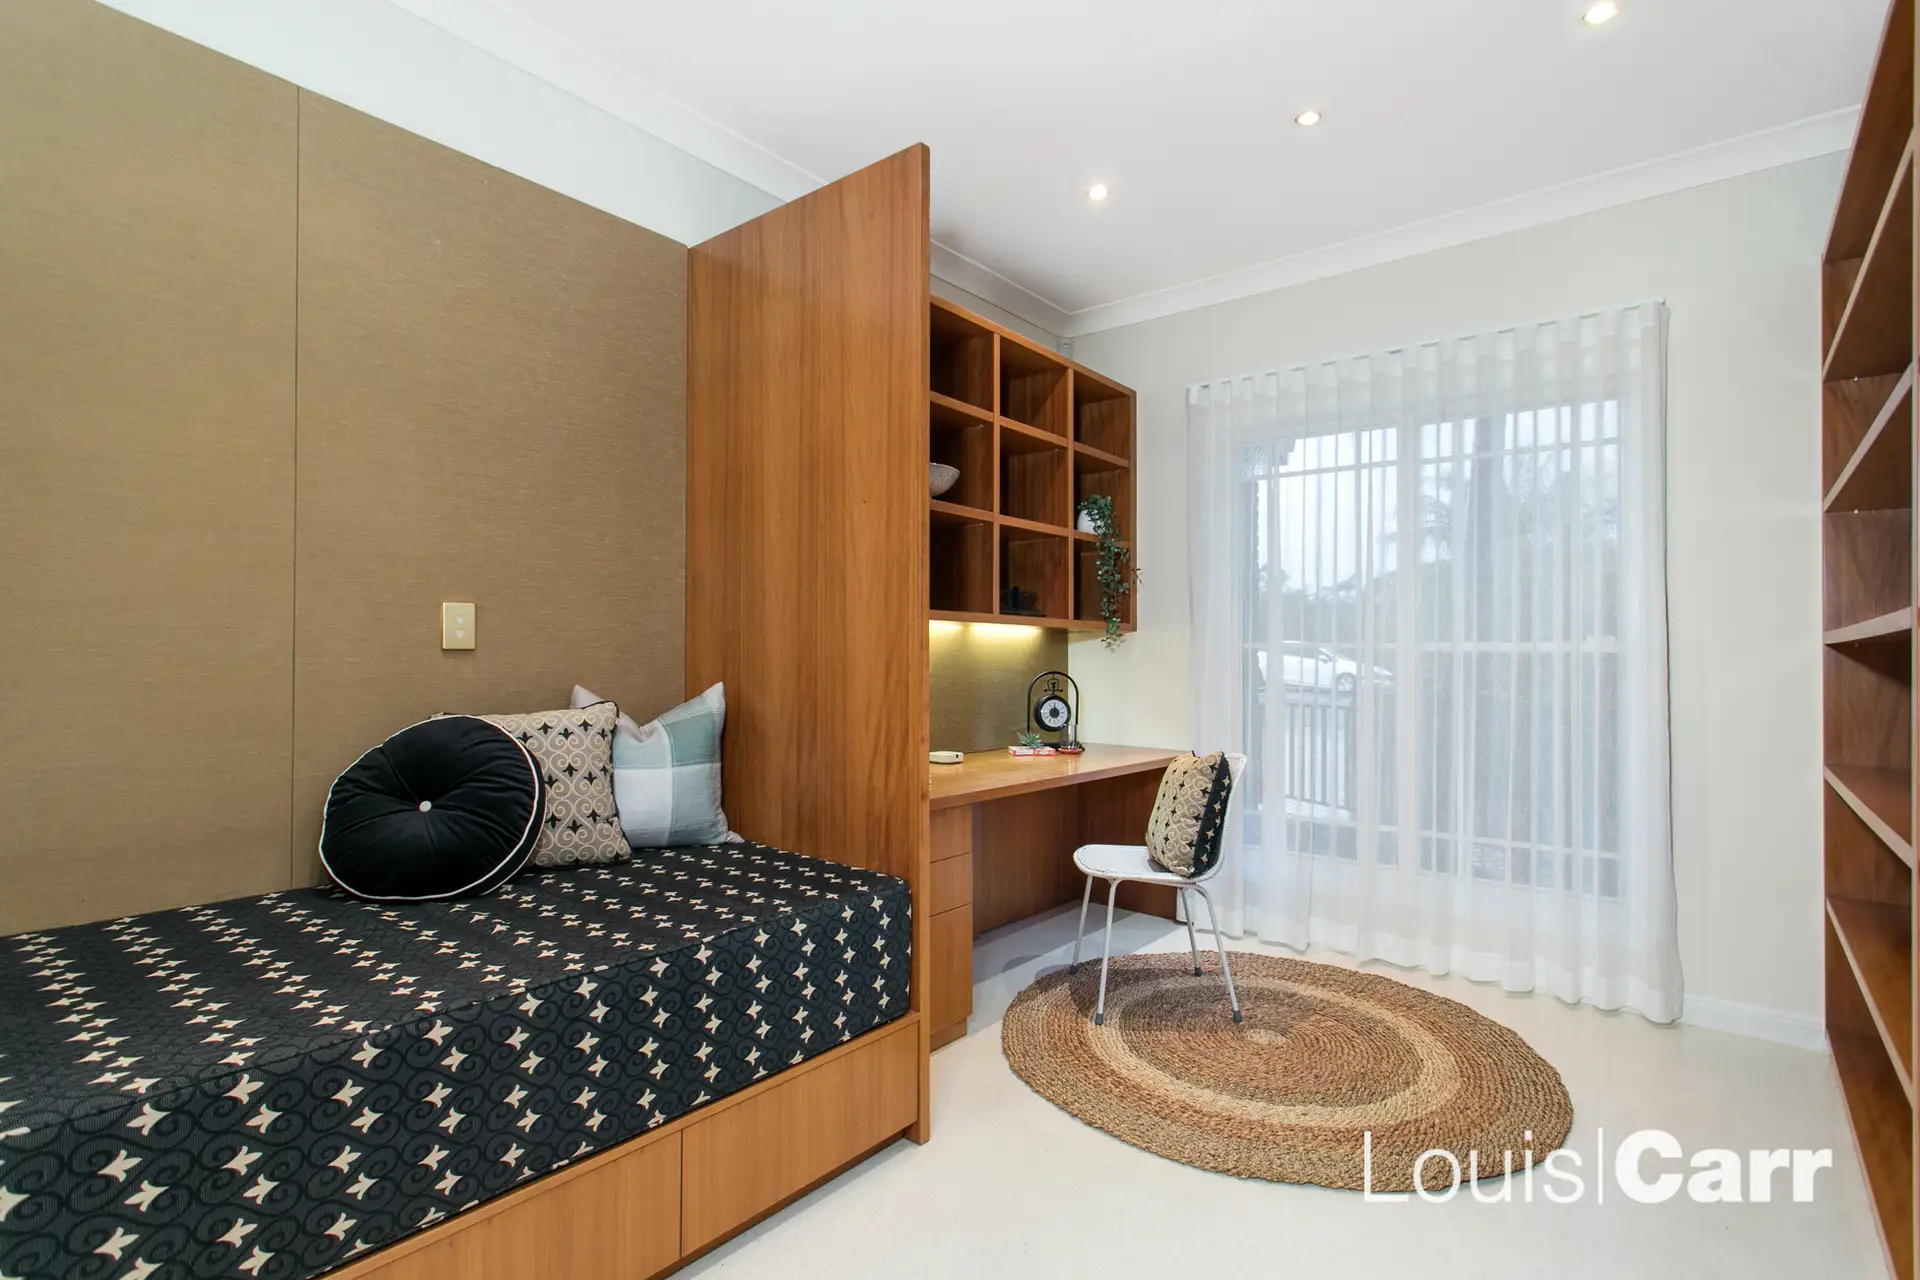 Photo #10: 37 Glenhope Road, West Pennant Hills - Sold by Louis Carr Real Estate